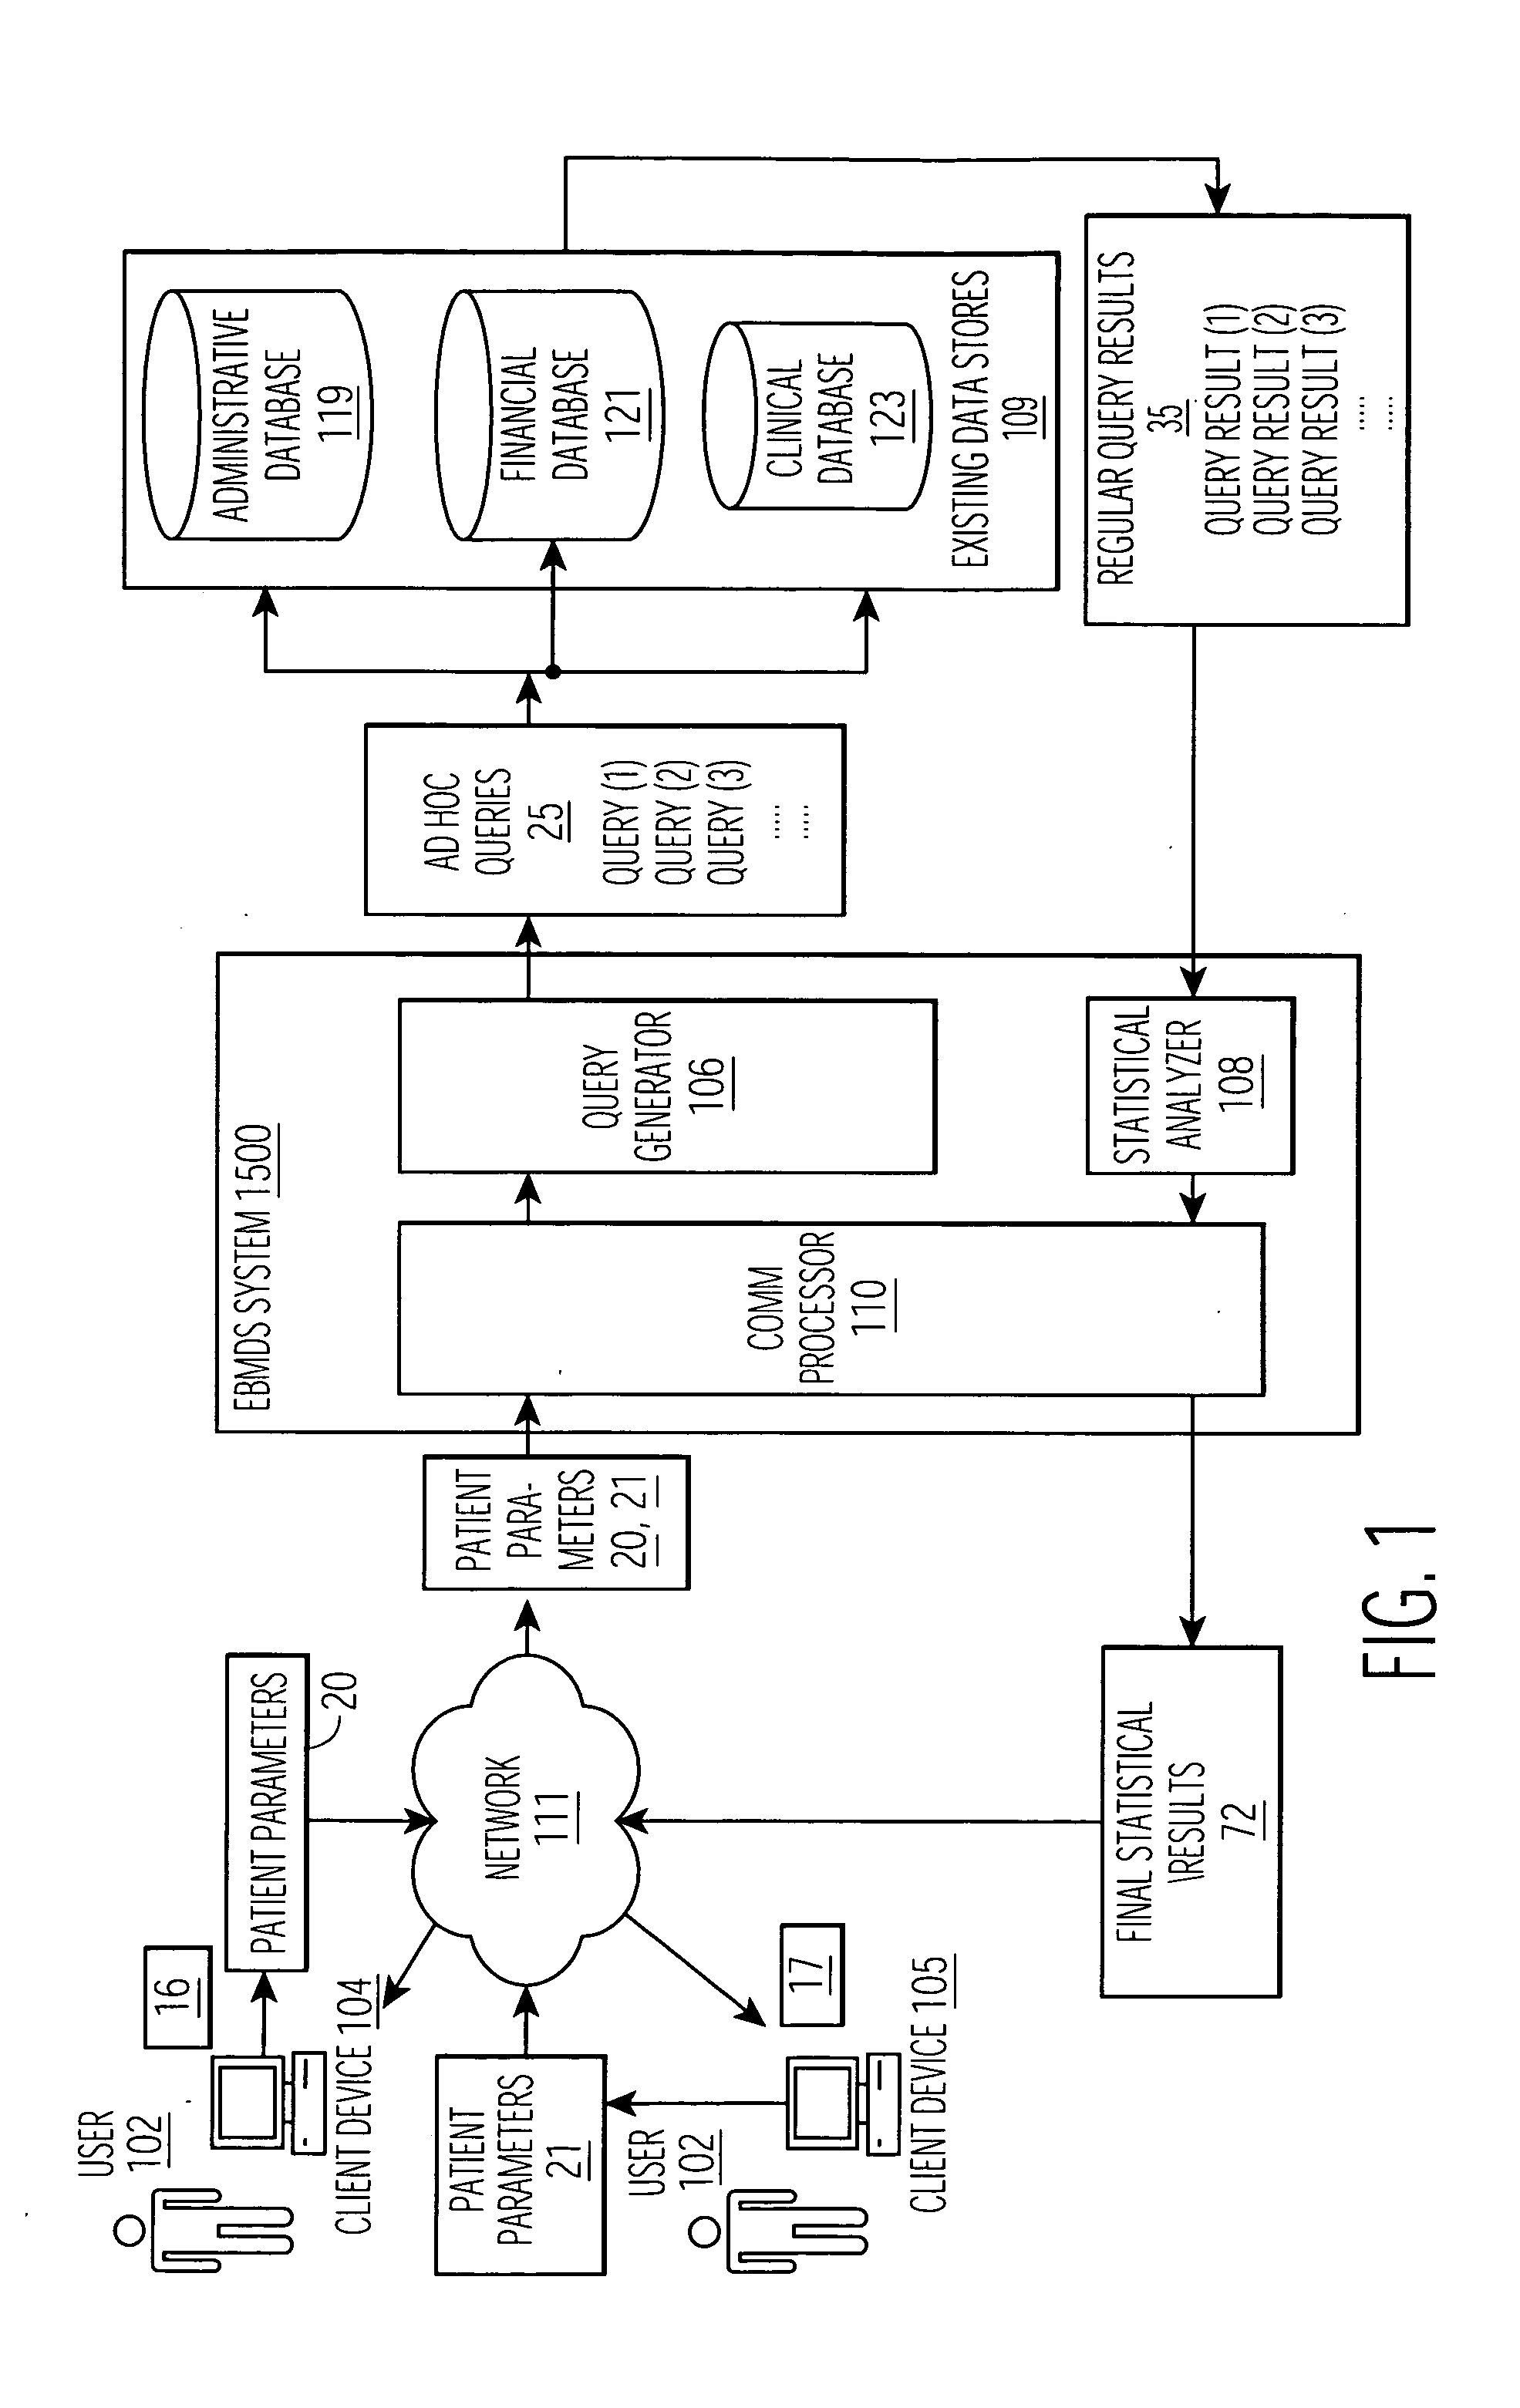 Method and system for providing medical decision support